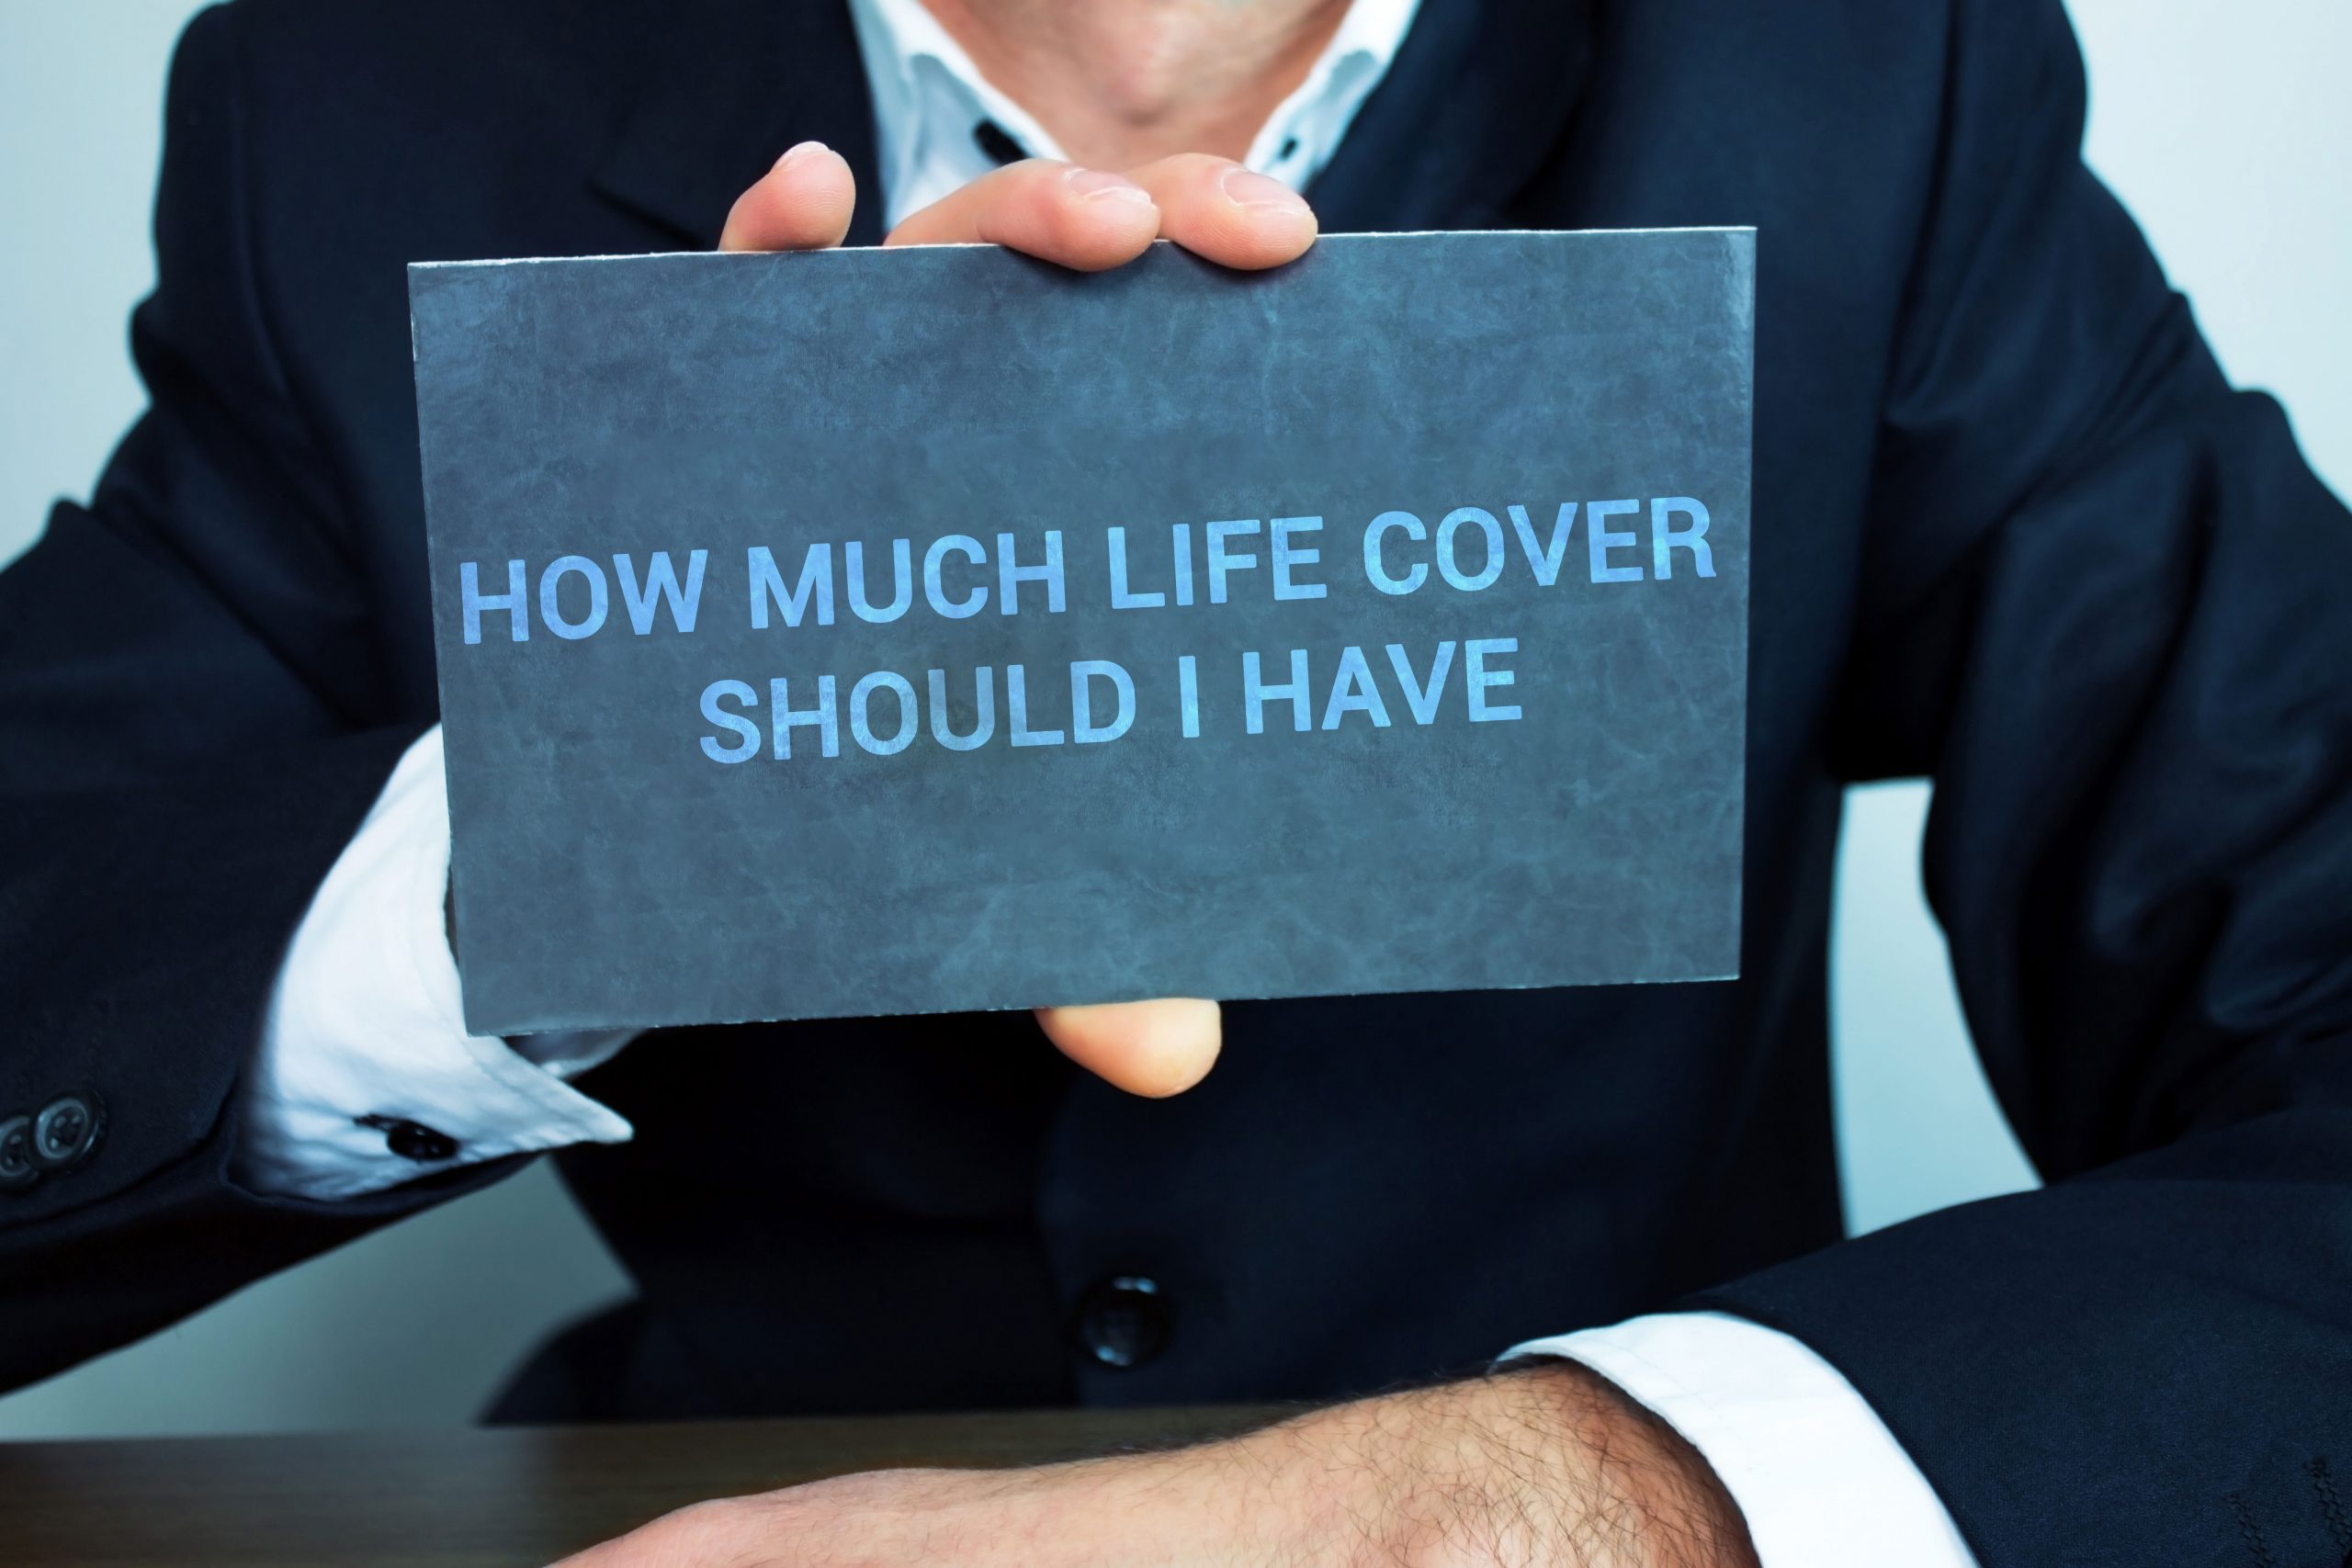 How much life cover should i have